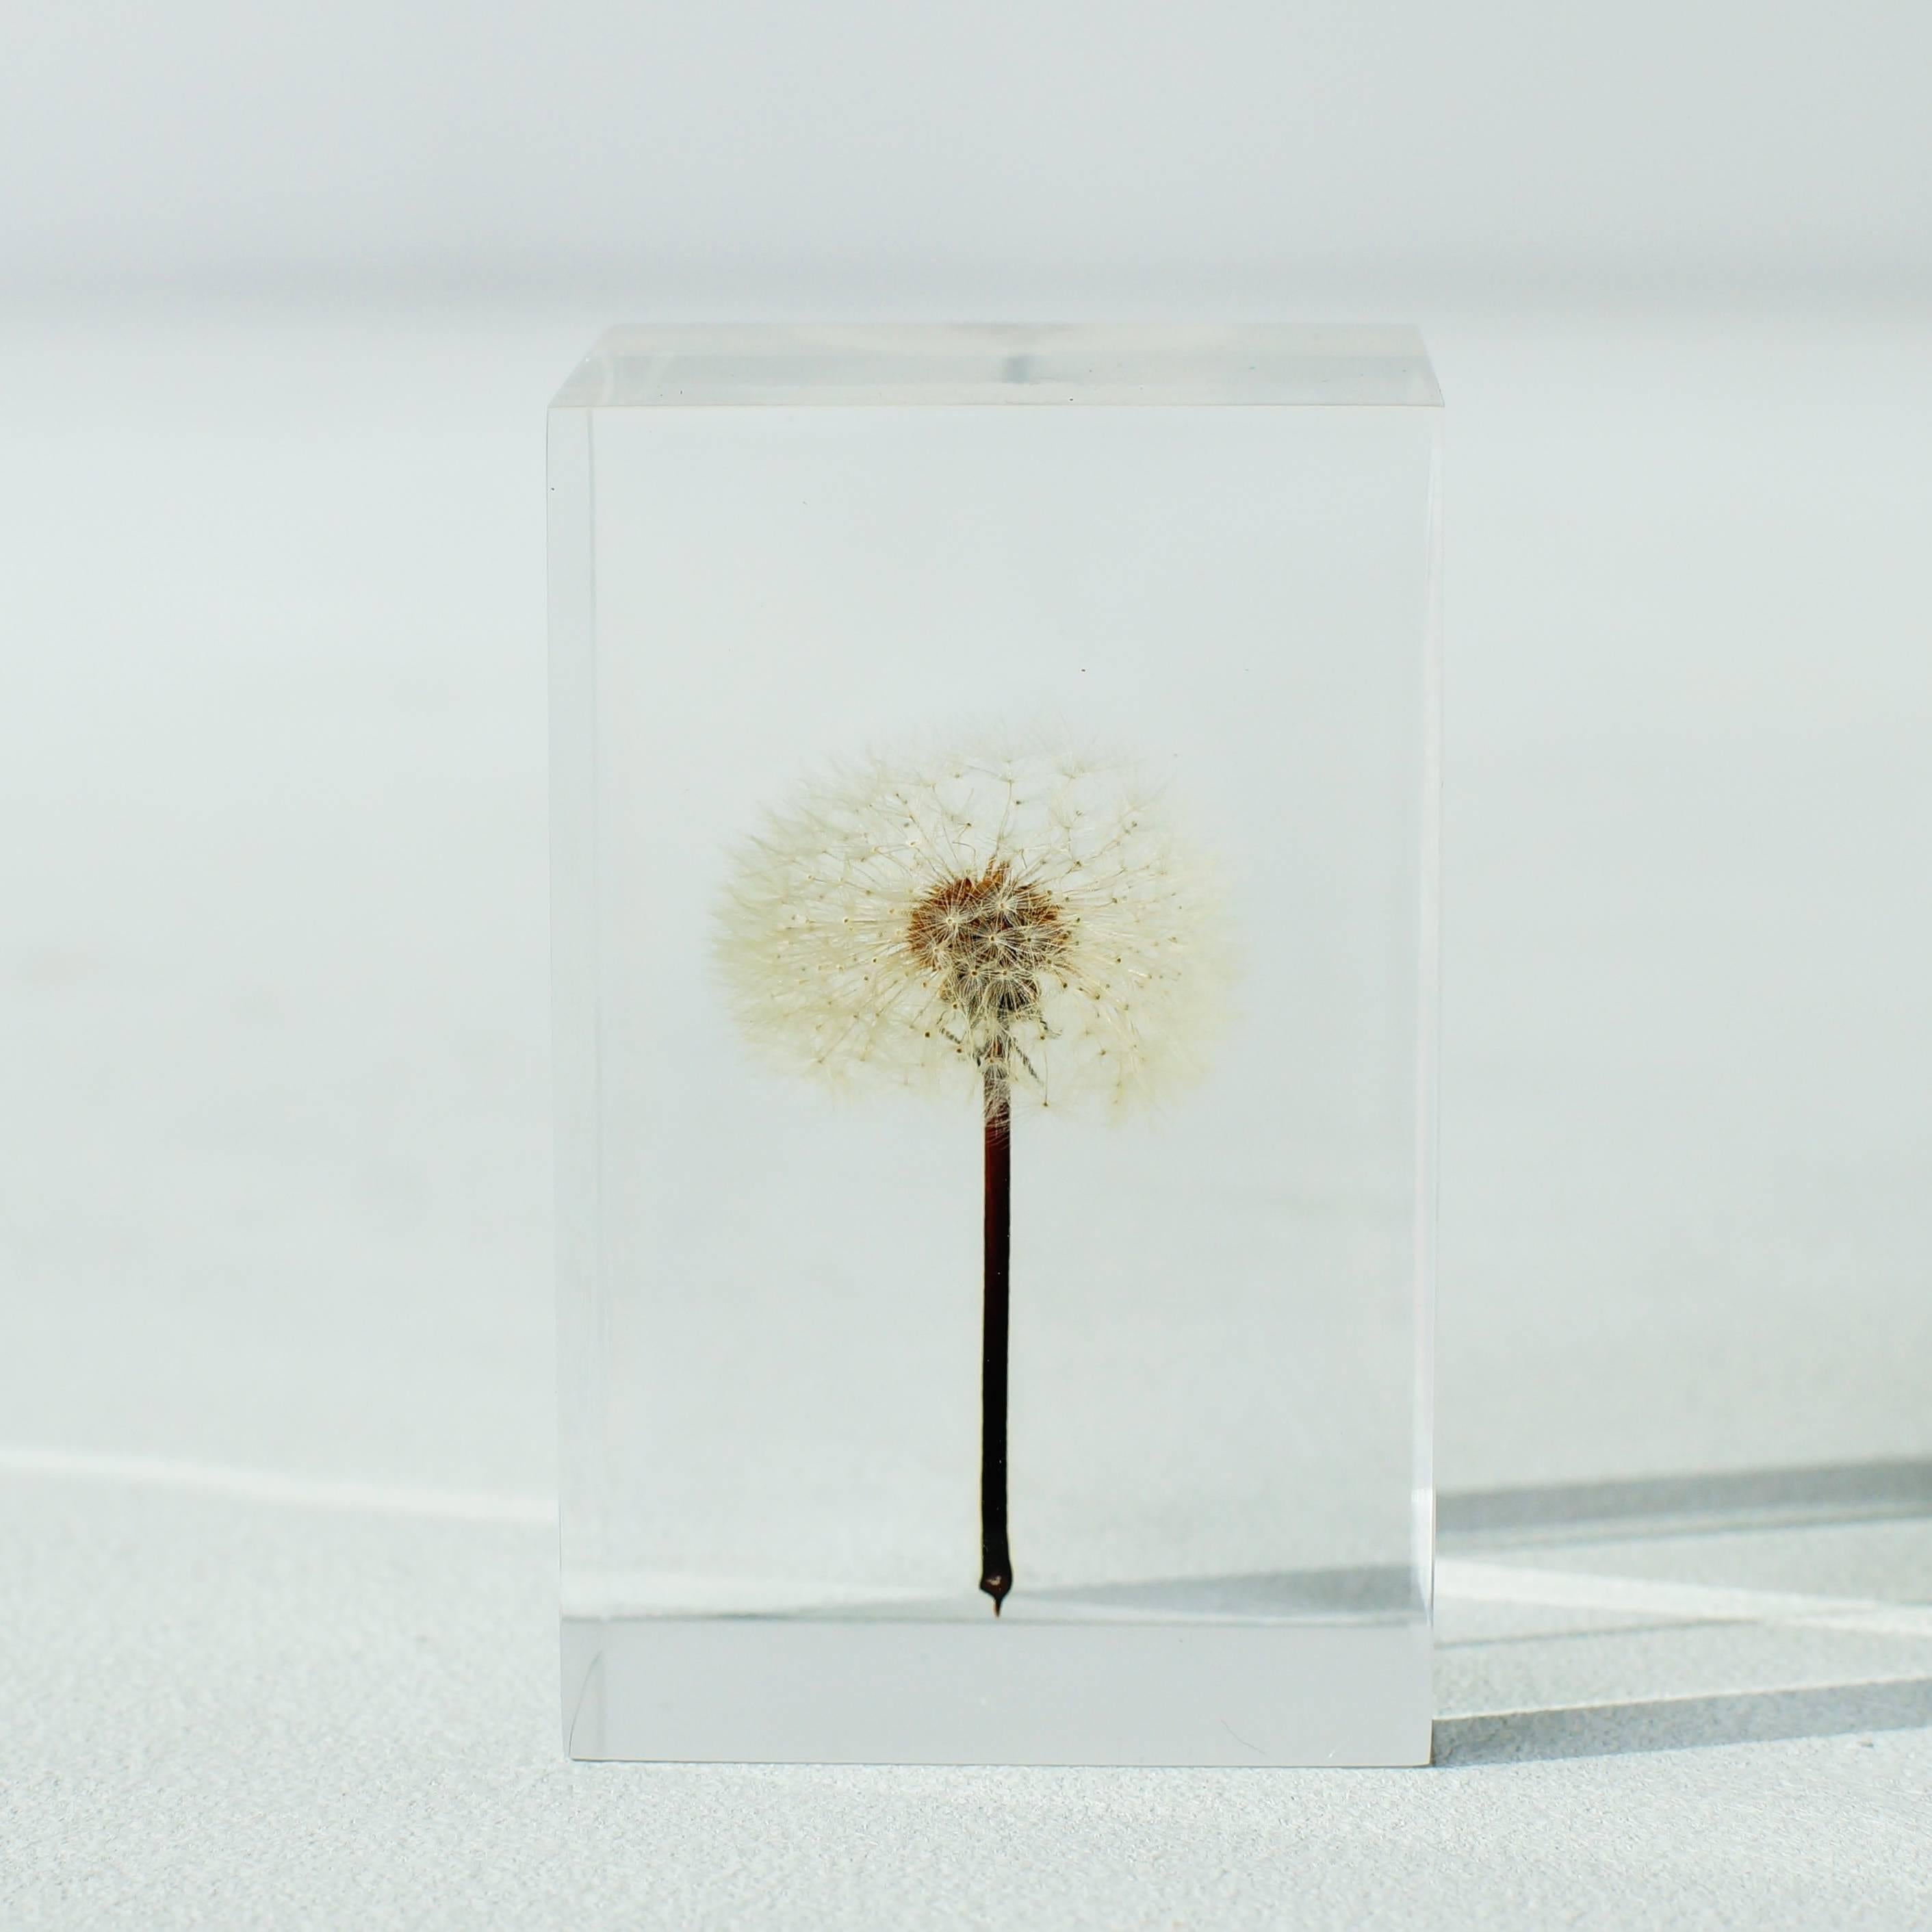 Object is what real dandelion sealed in acrylic. Artist is Takao Inoue who is based in Tokyo.
 He harvests dandelions by himself in spring season, and put them into work of art. Quantities of production are changing every year.
 
 Since the